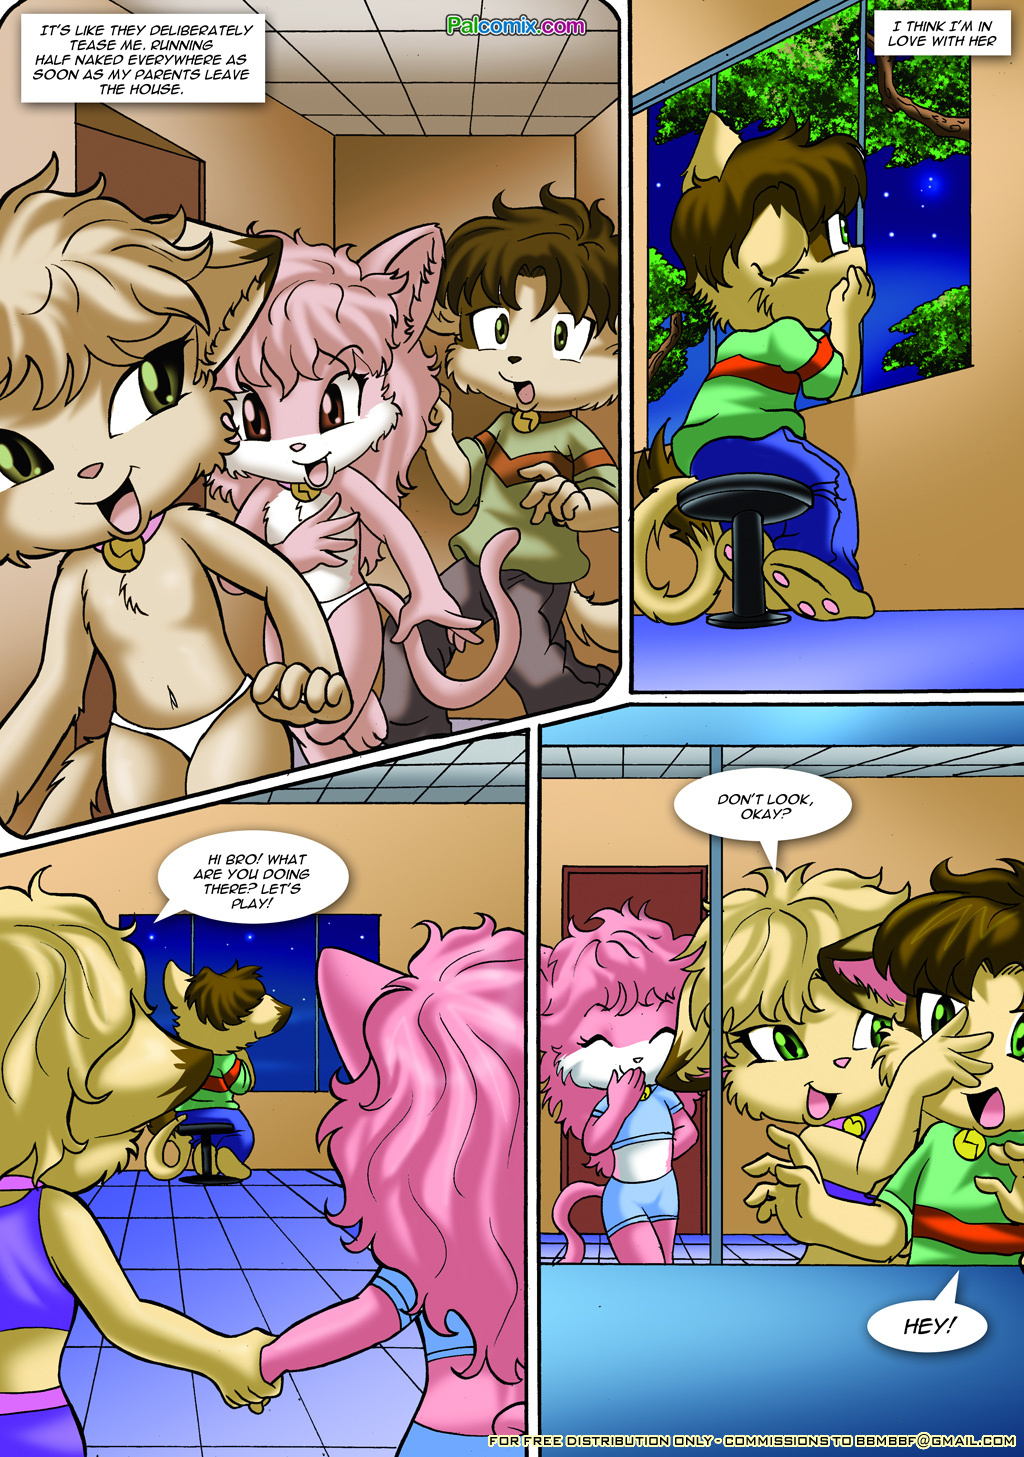 Those Good Old Games - Chapter 2 - Here Comes April porn comic Oral sex, Blowjob, Cum Shots, cunnilingus, Furry, Group Sex, incest, Straight, Threesome